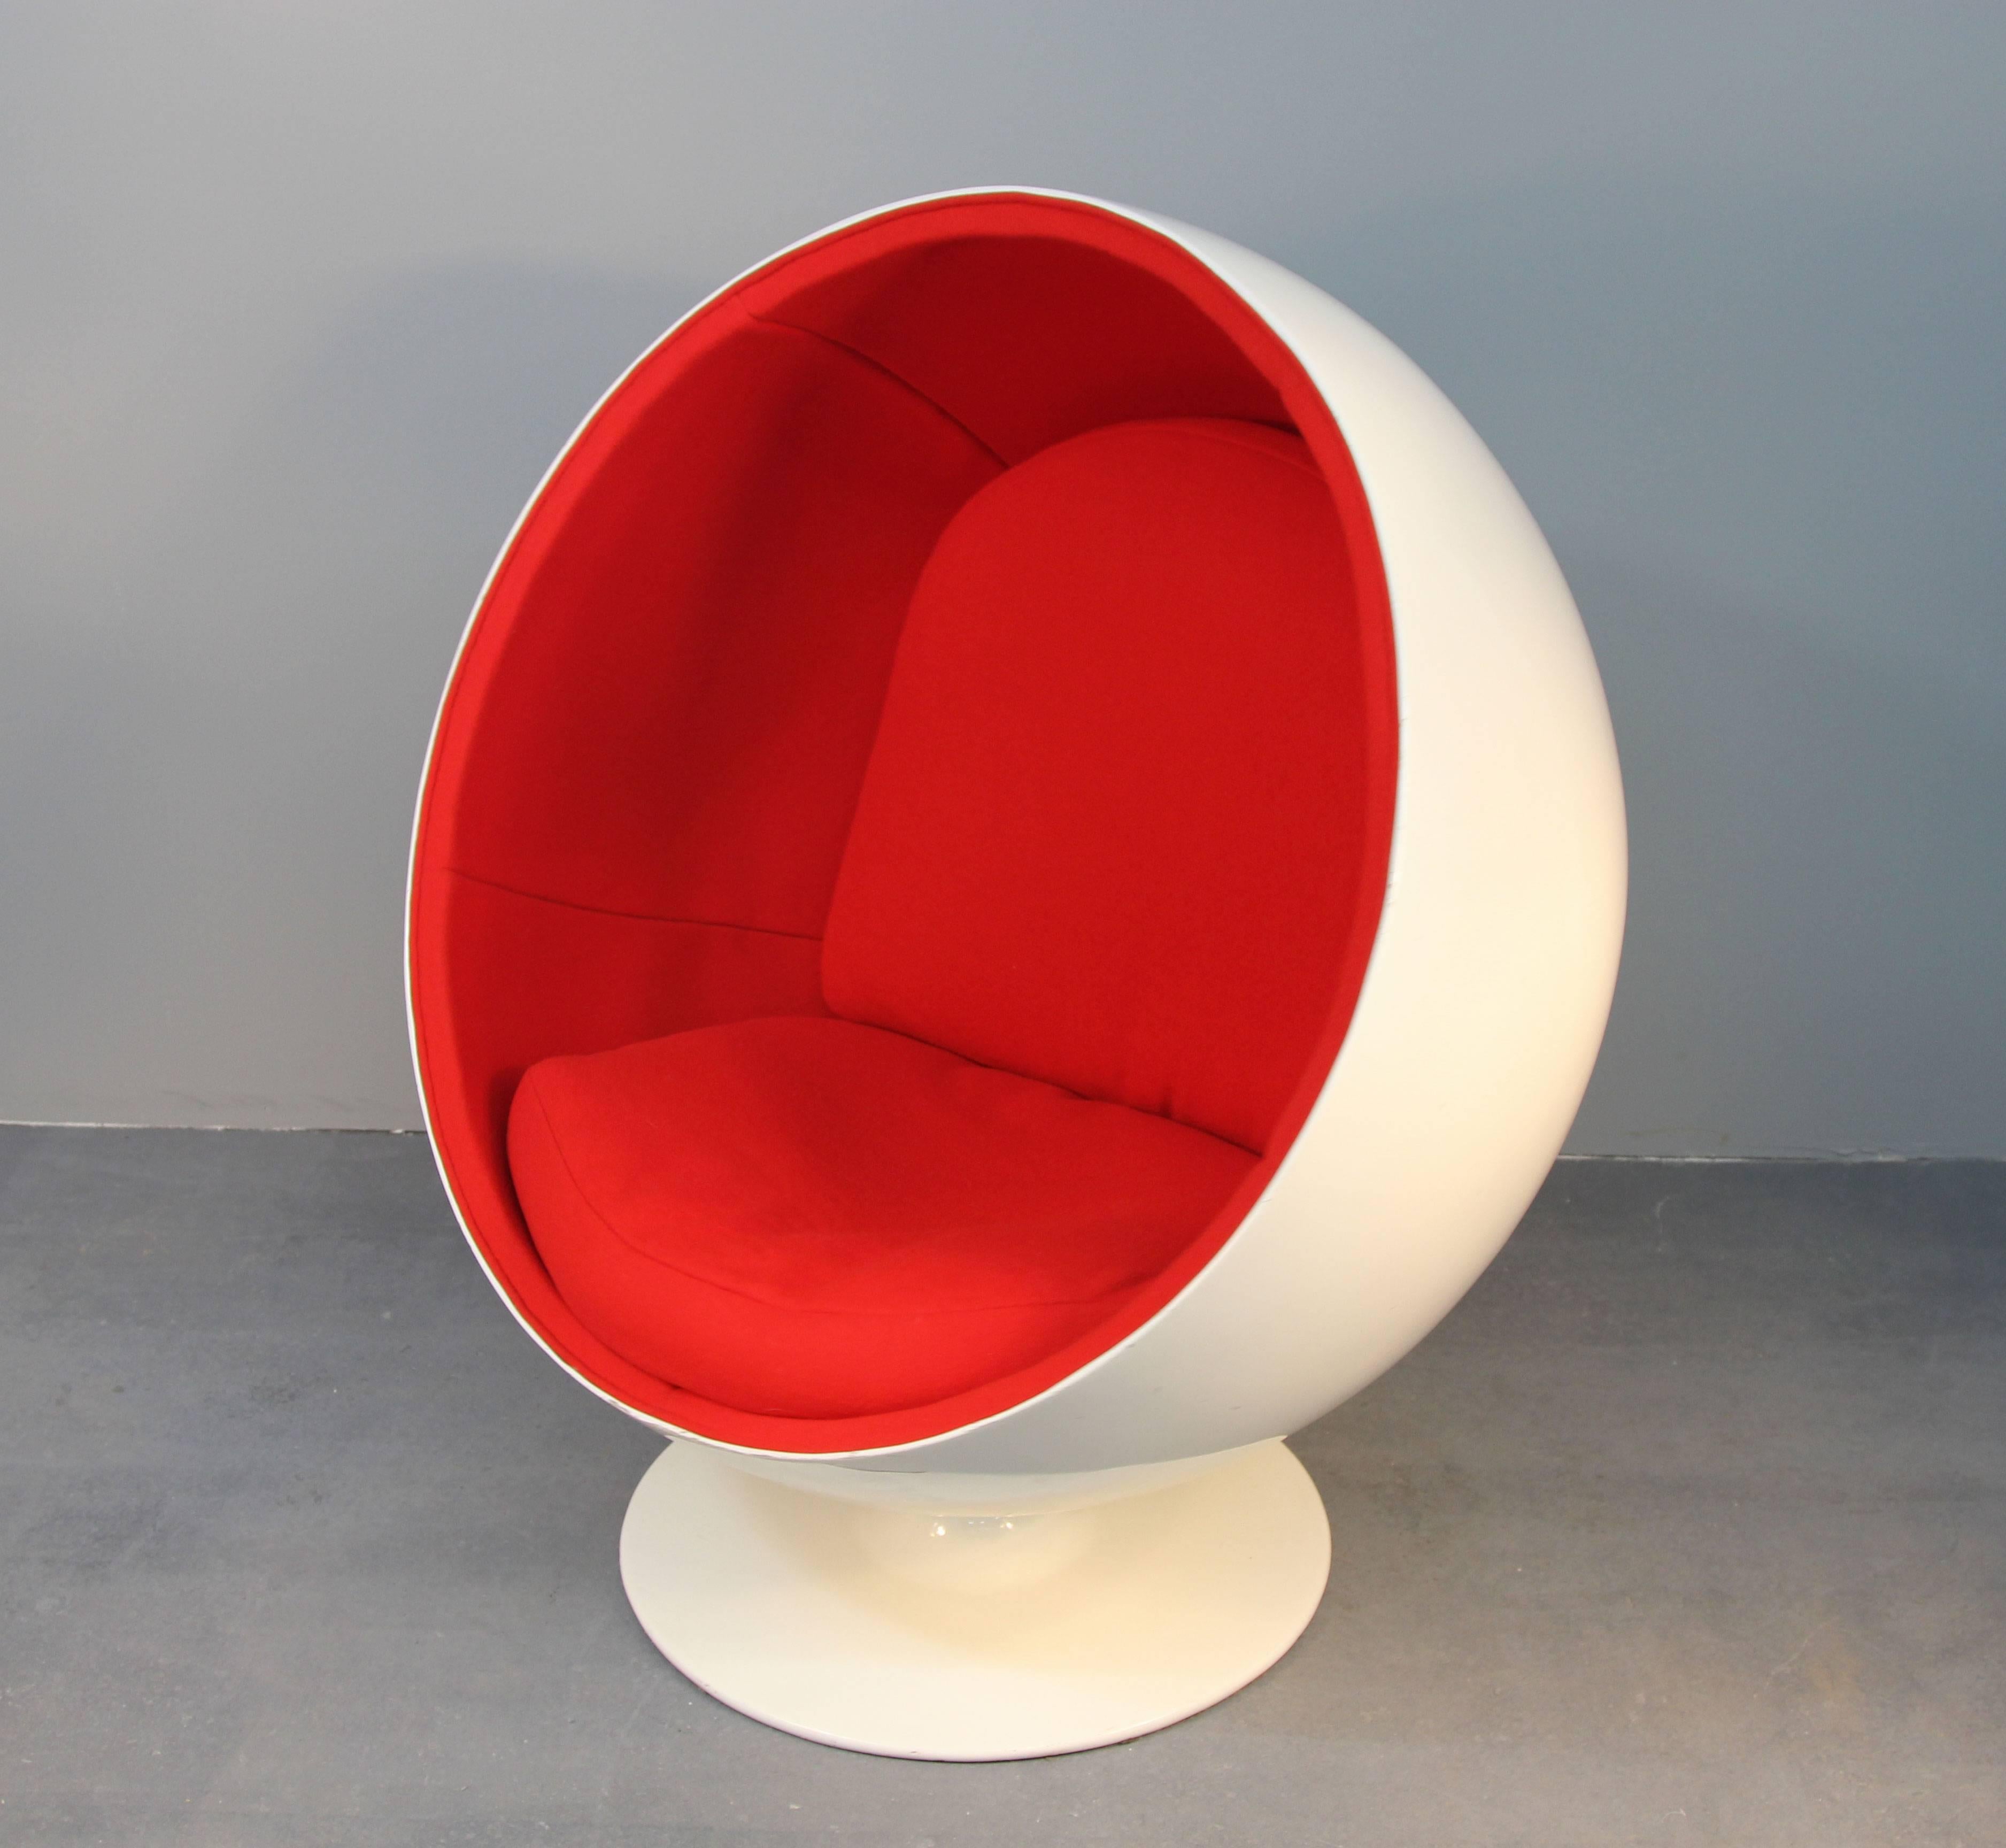 Amazing example of 1960s design. The Eero Aarnio ball chair made of fiberglass, aluminum, and newly upholstered in vibrant red upholstery. Swivels 360 degrees, very comfortable, incredibly stylish.